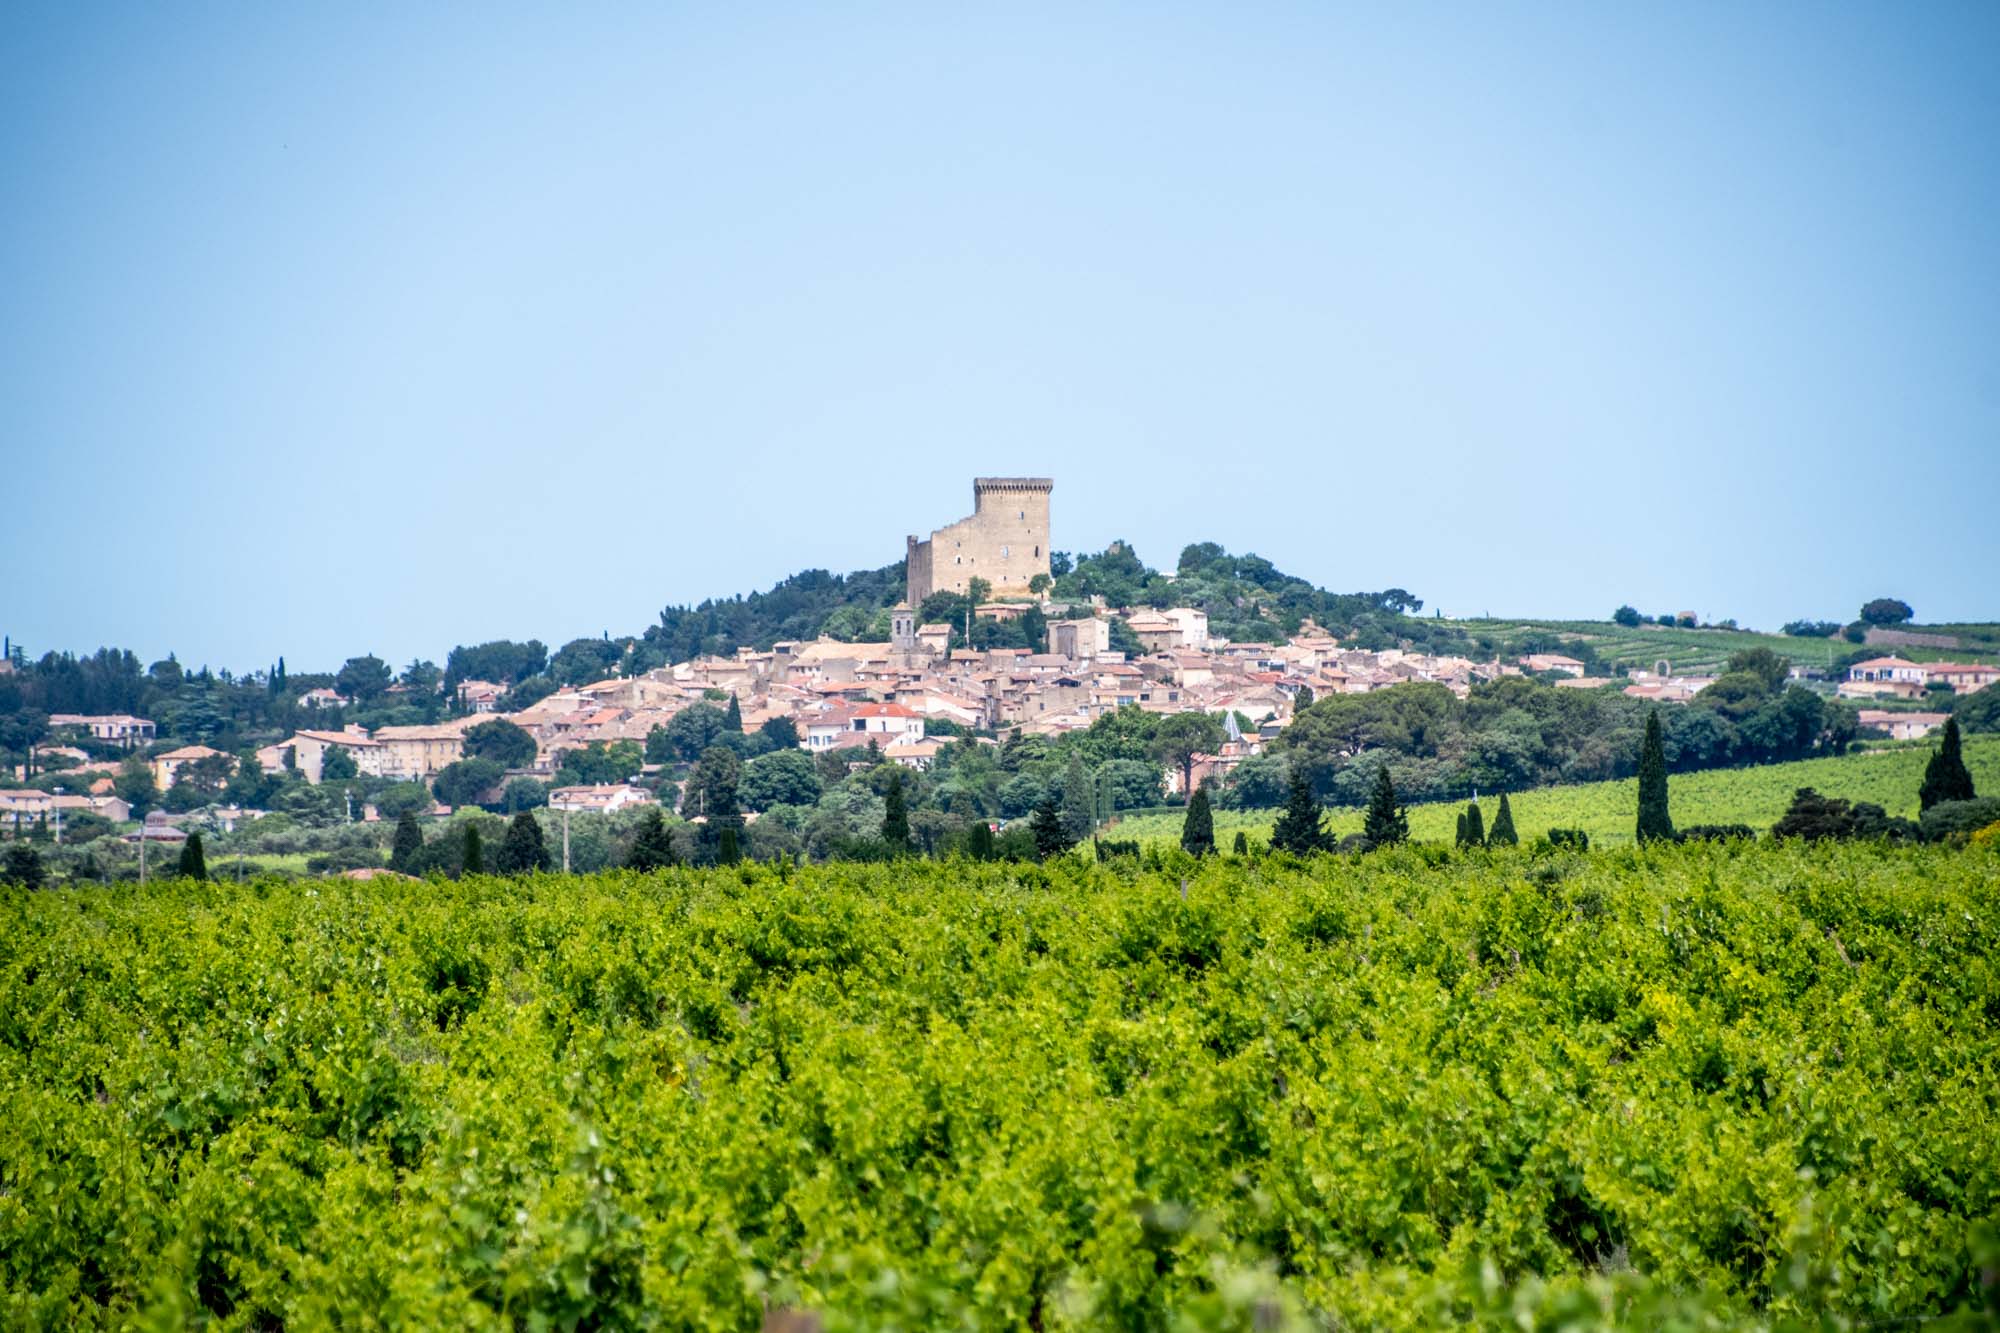 Vineyards surrounding a small village with a tall building at its center